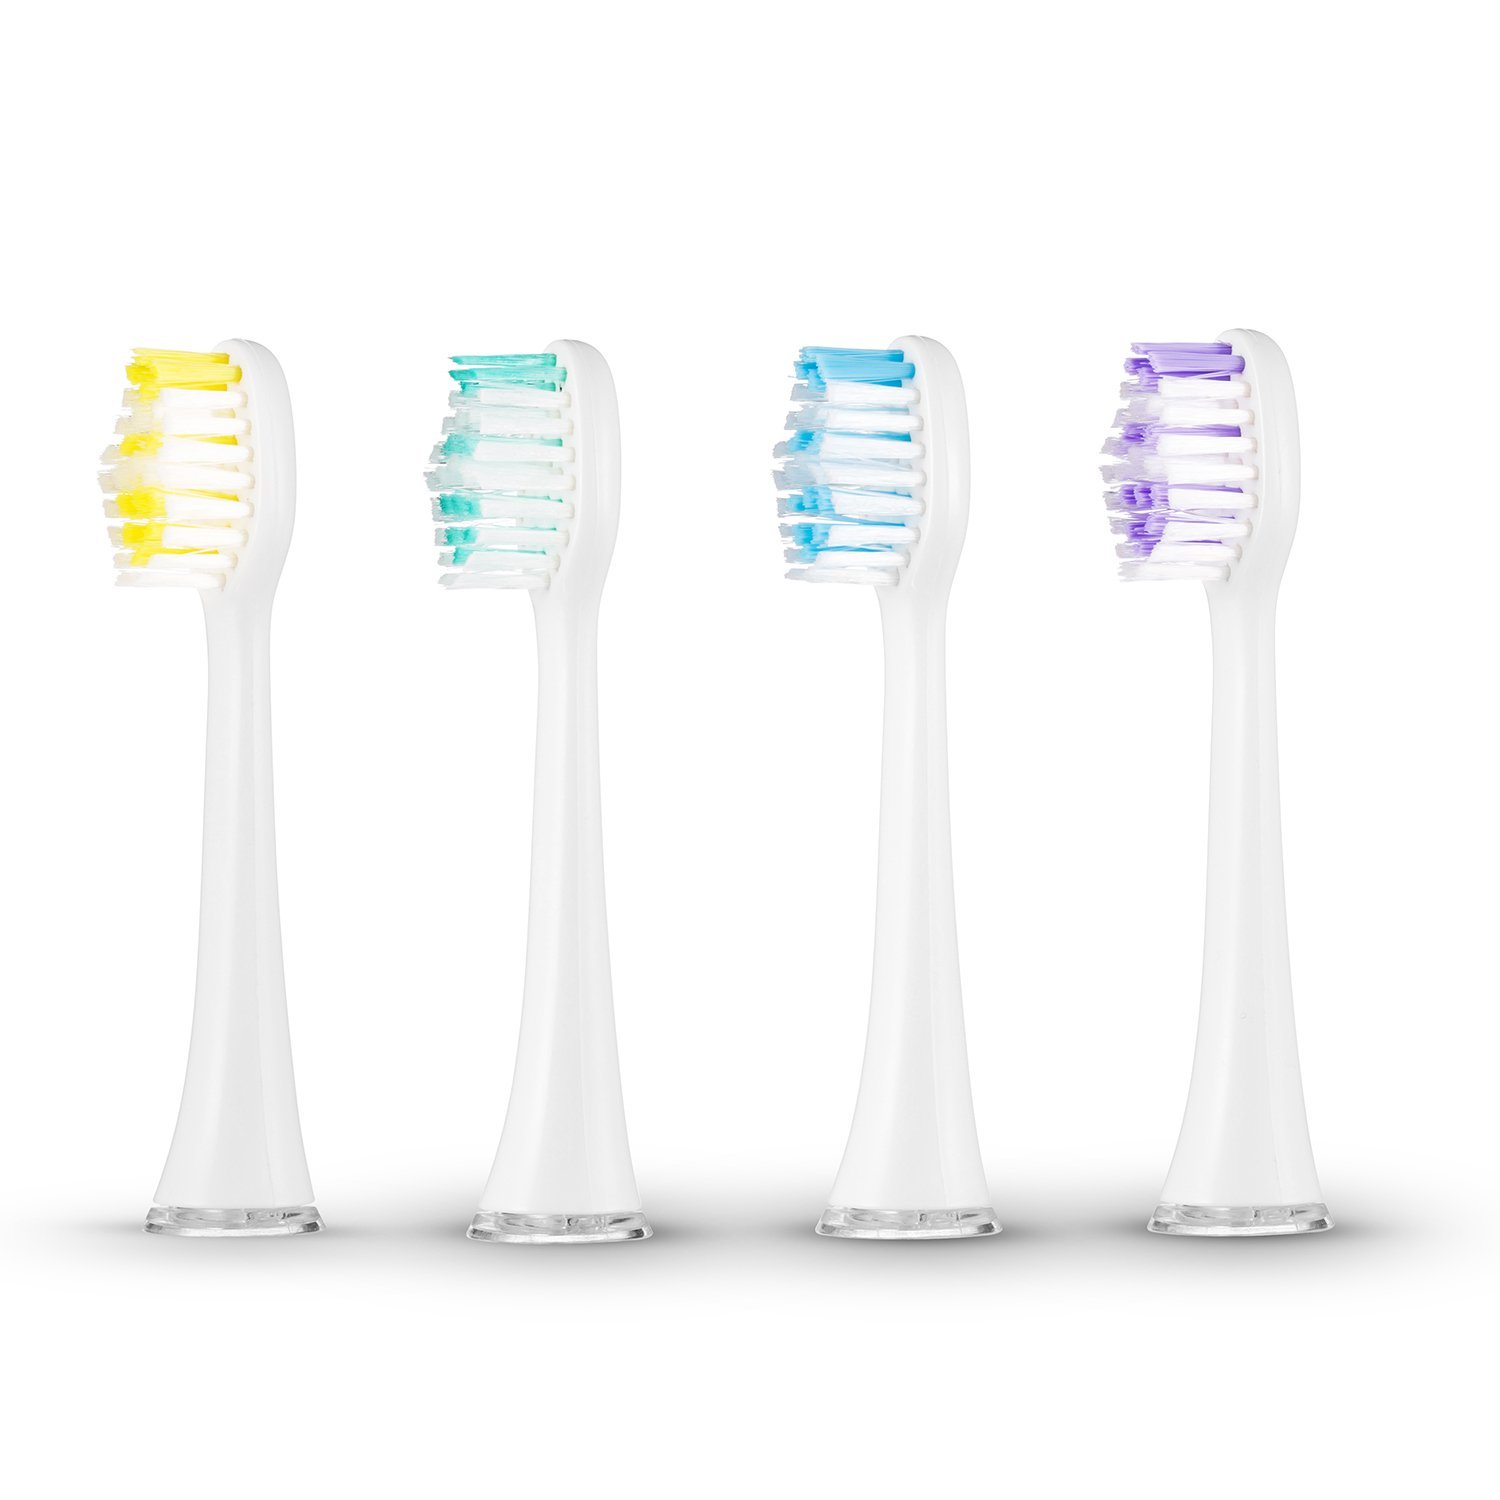 Toothbrush Heads, DIKI Electric Toothbrush Heads Sonicare Interspace Replacement Head Rechargeable Toothbrush Heads Easy Clean Whiten for Sonic Electric Toothbrushes Pack of 4, White